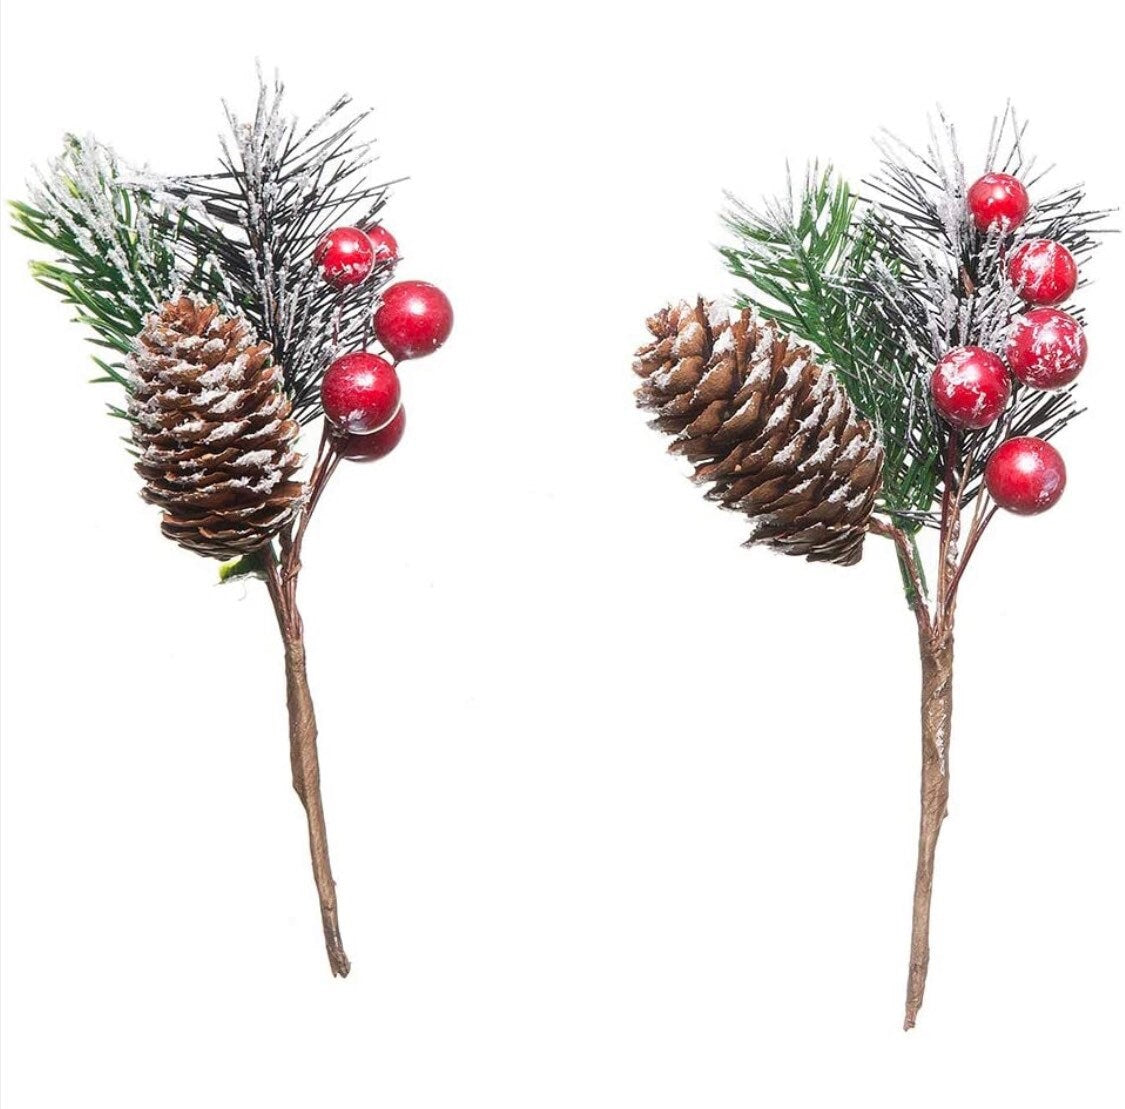 Pine Bough Assortment - 10ct Christmas stems - Large Pine Snow Berry Boughs - Winter Stems